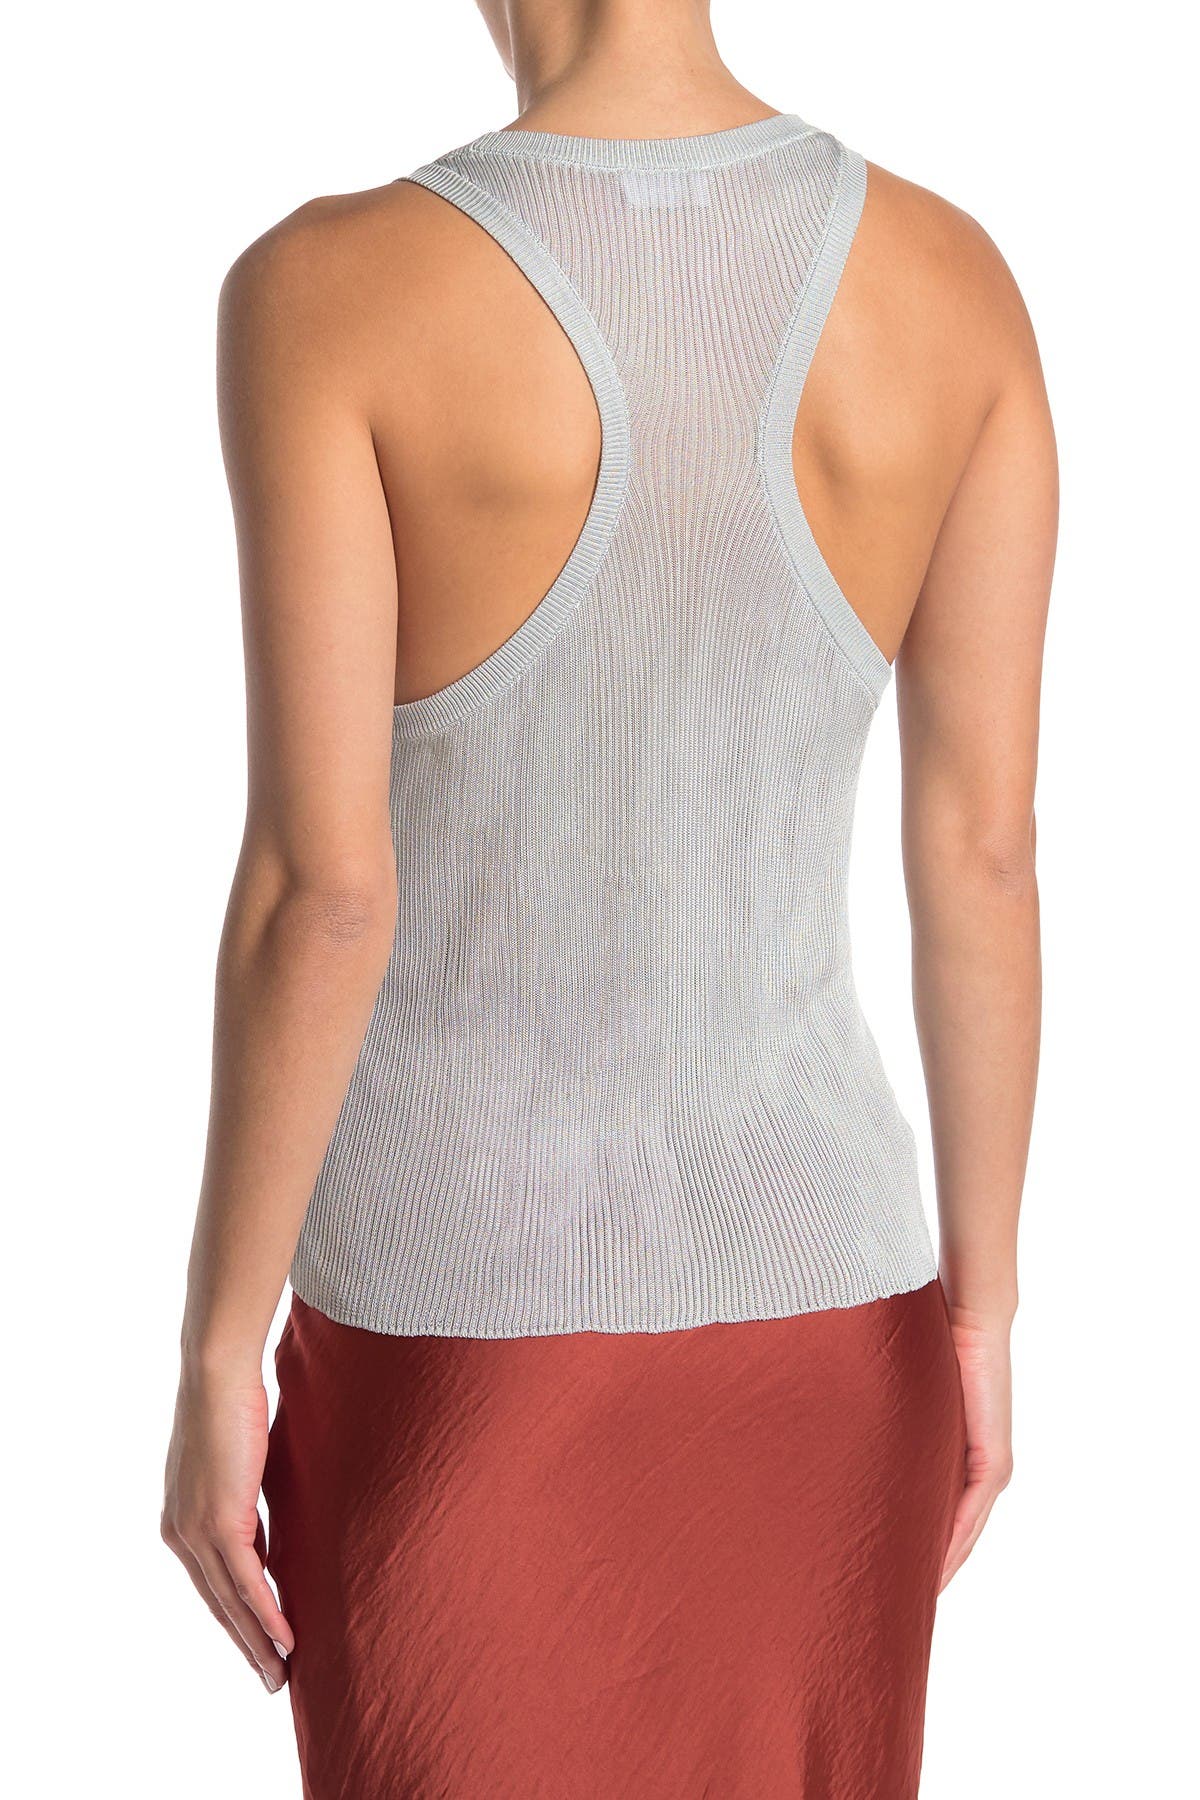 Red Valentino Sheer Knit Tank In Silver2